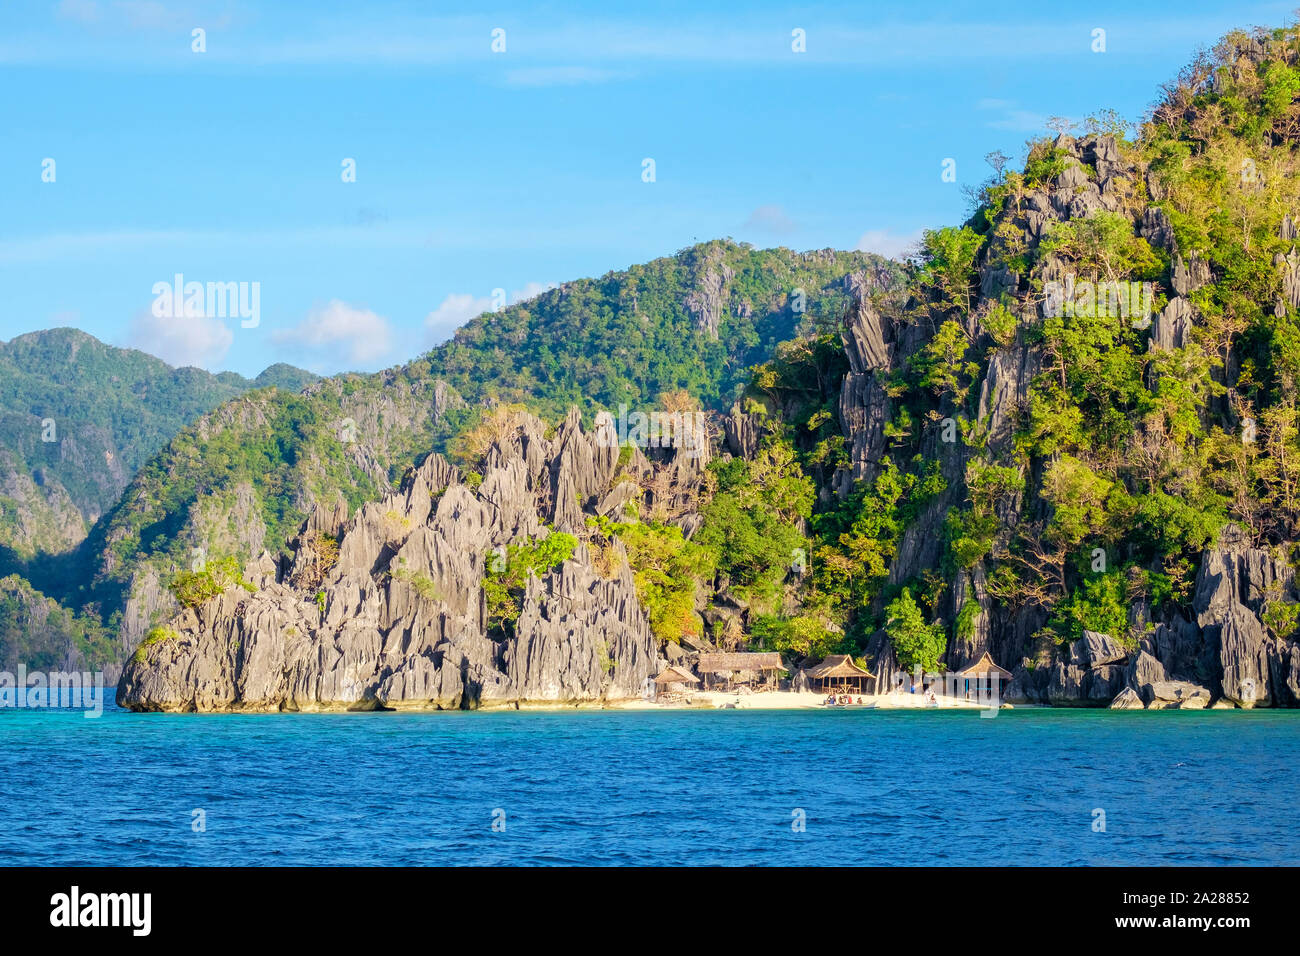 Small native village of thatched huts on the coast of Coron Island, Coron, Palawan, Philippines Stock Photo